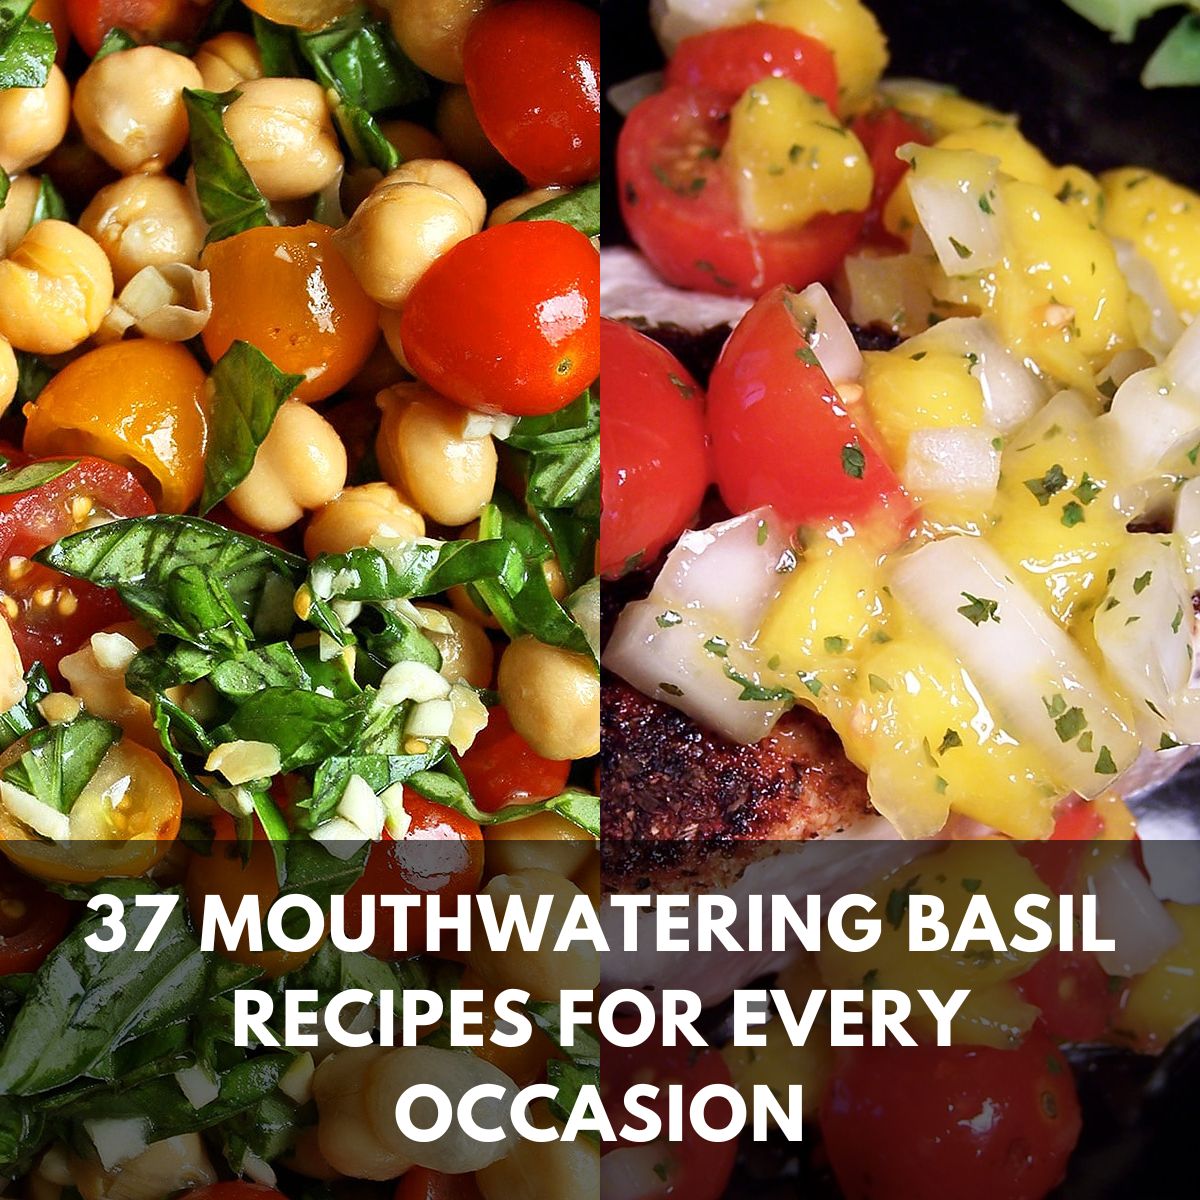 37 mouthwatering basil recipes for every occasion main